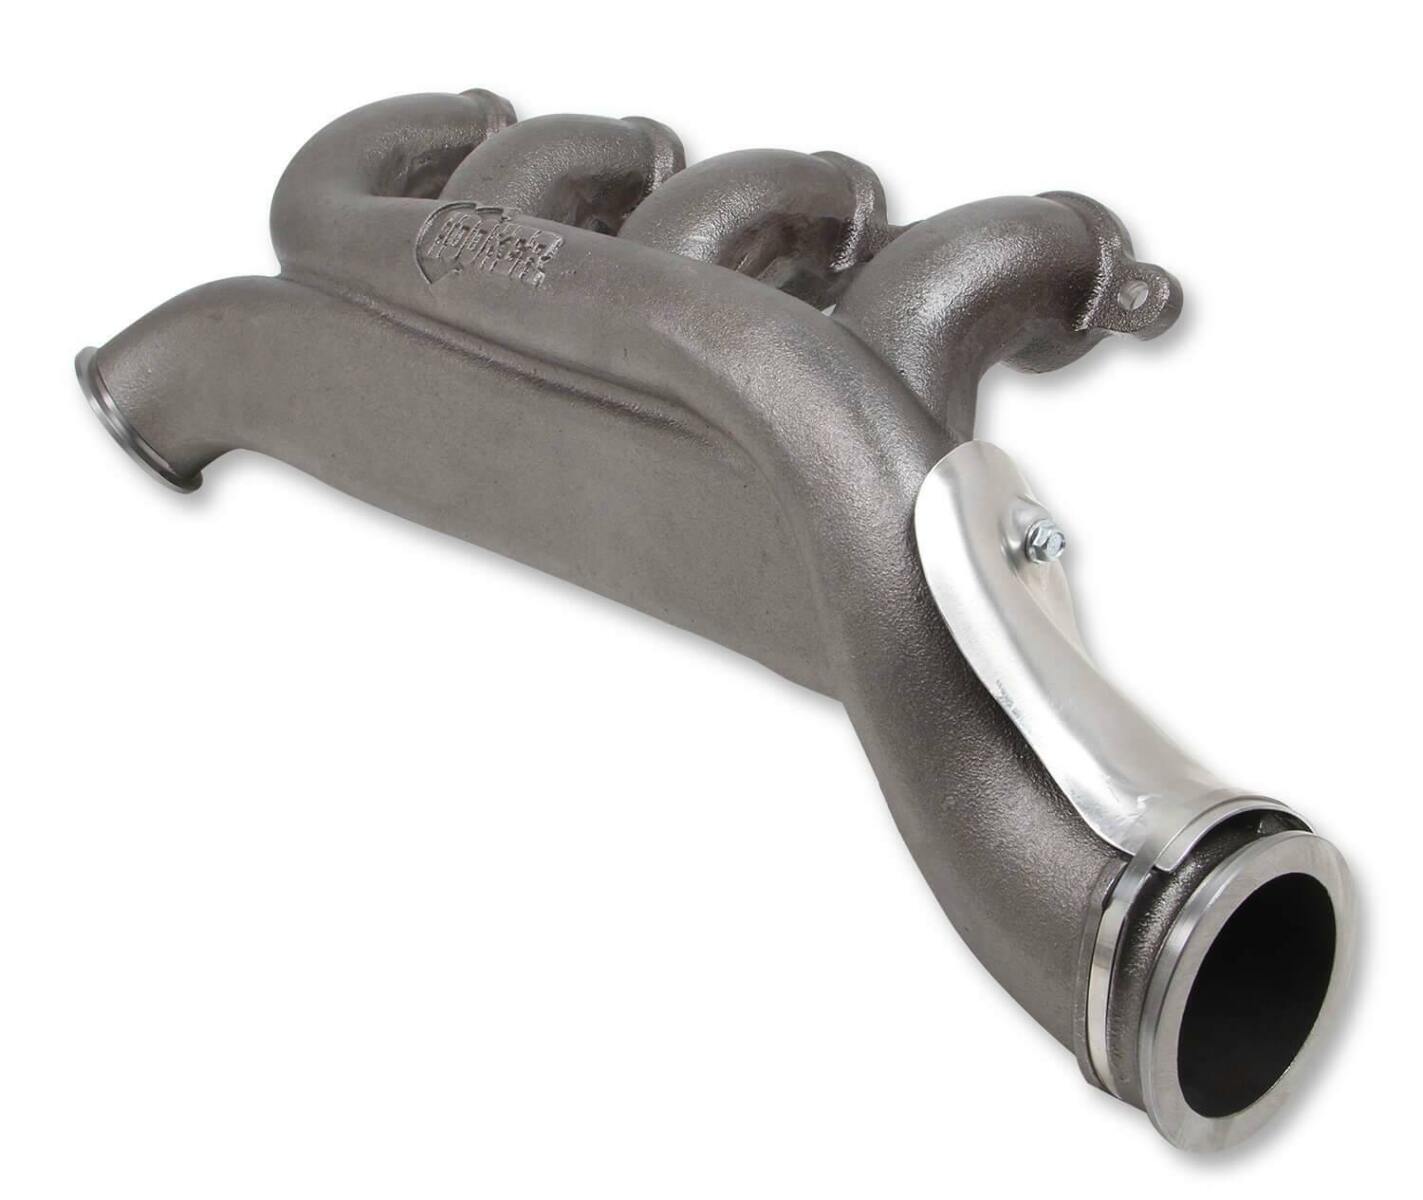 Hooker LS Turbo Exhaust Manifolds 8510HKR